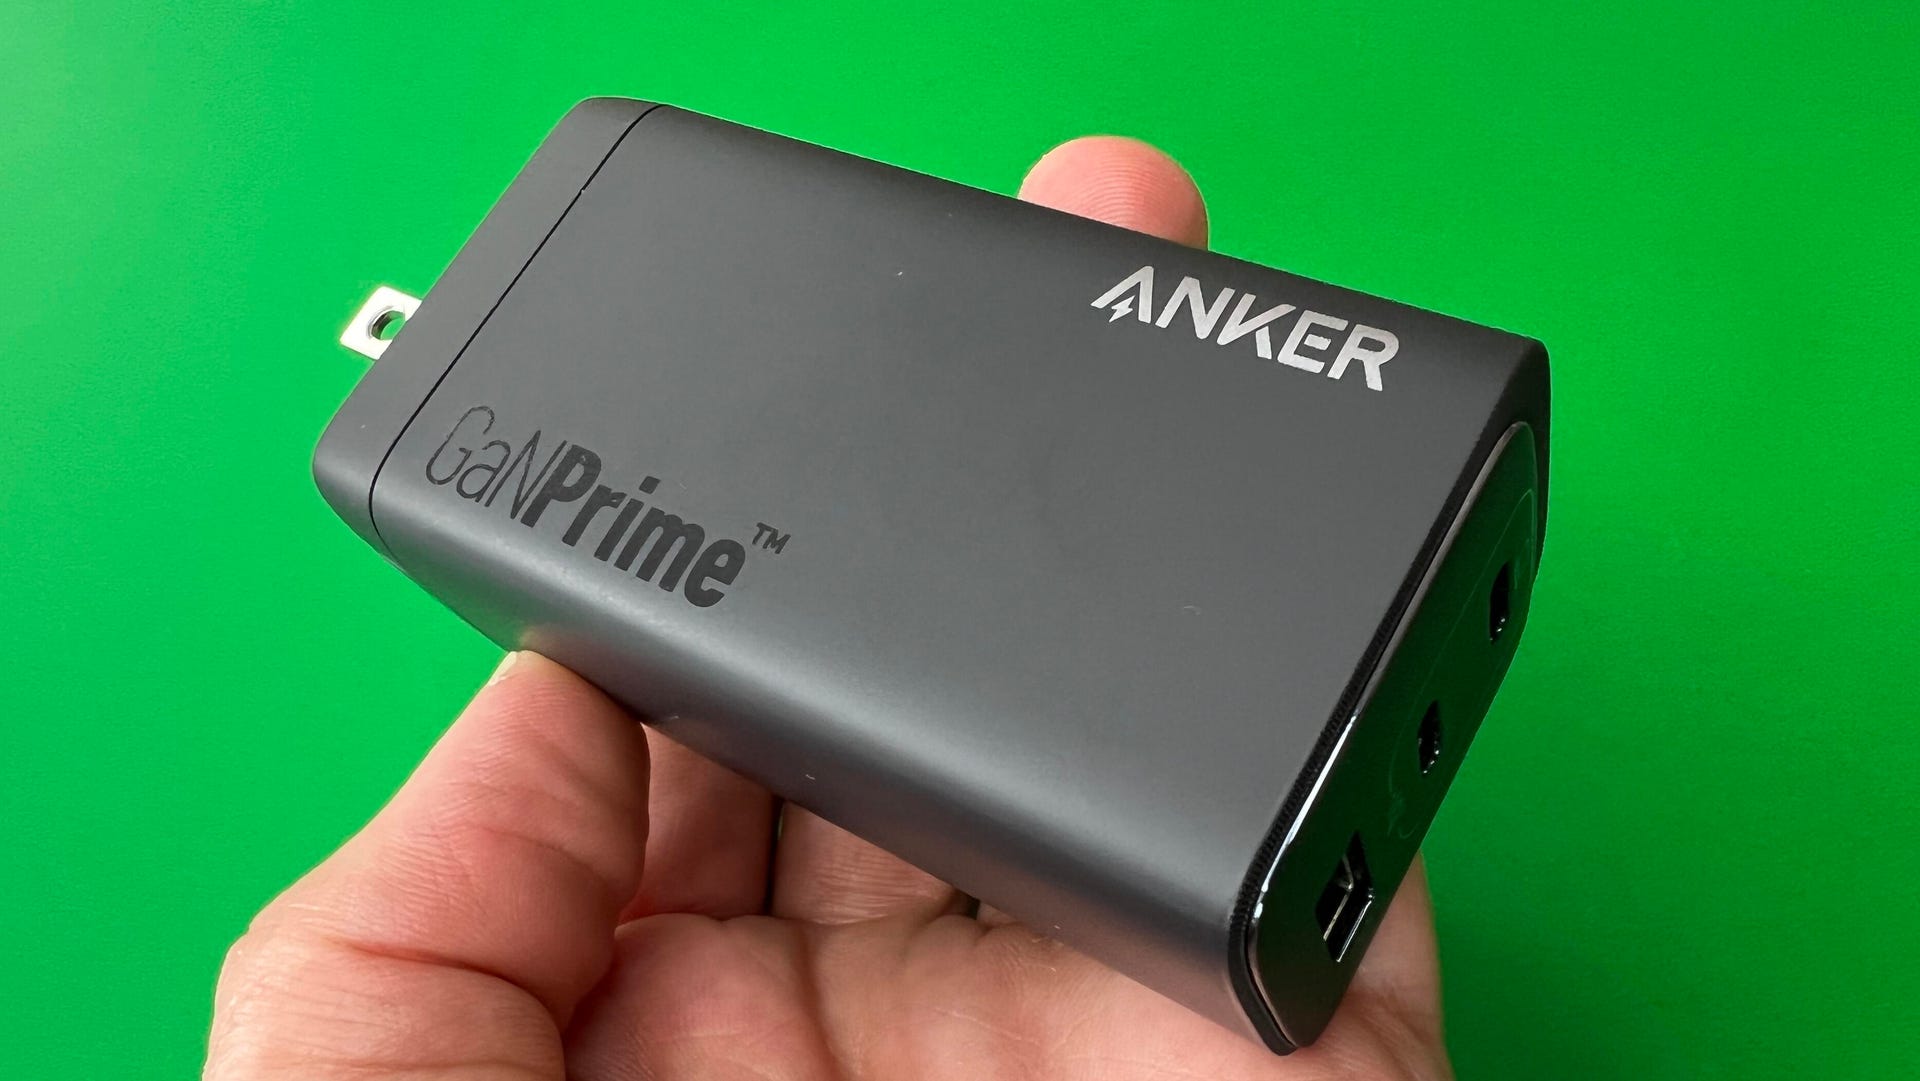 The Anker 737 GaNPrime Charger outputs 120W of power